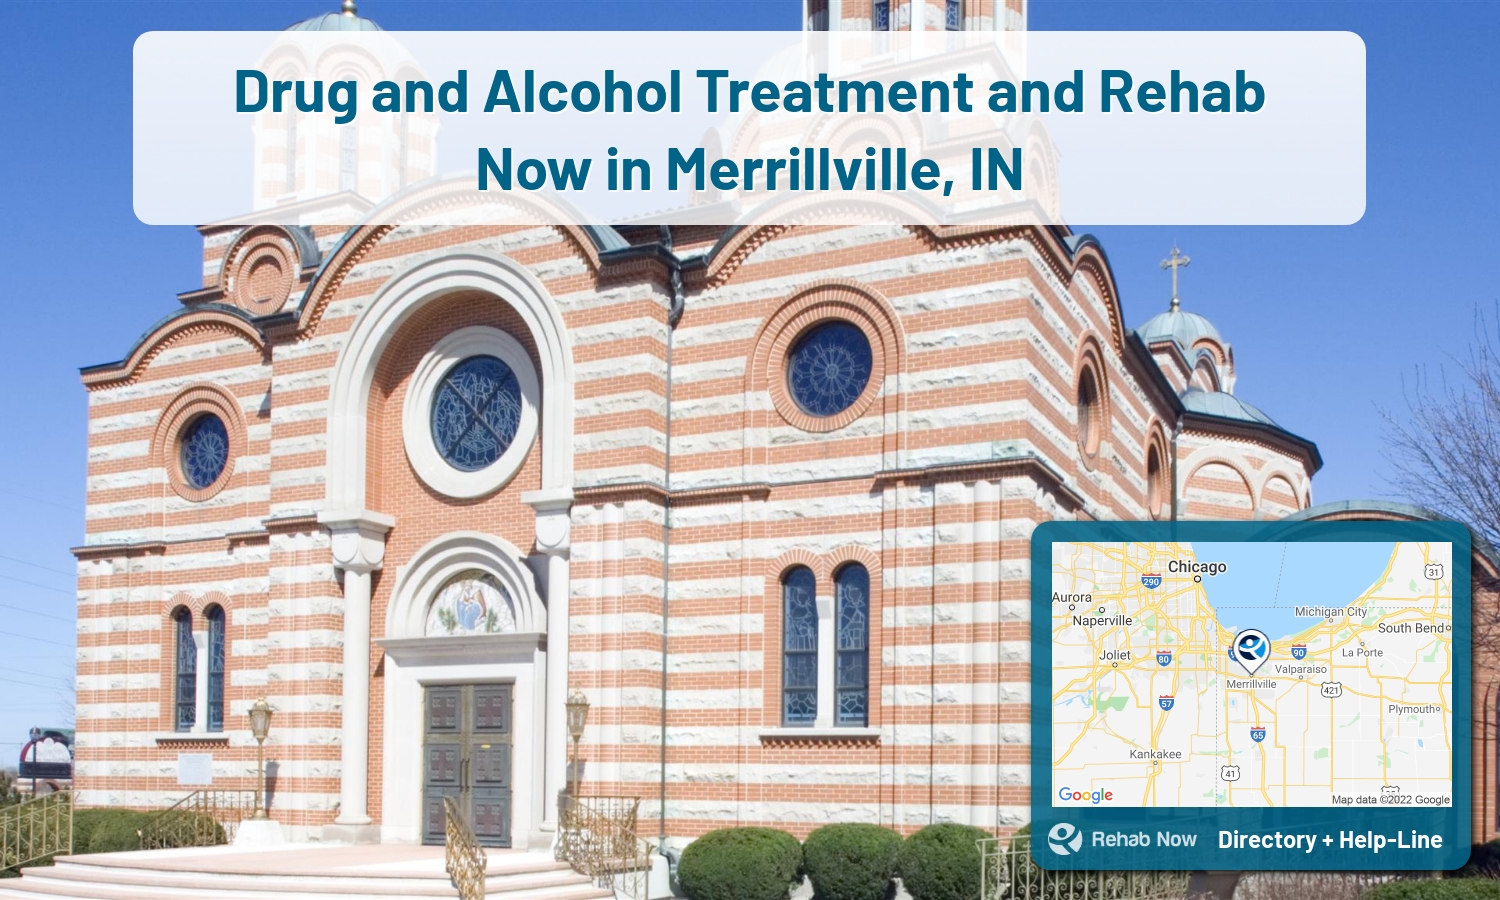 Merrillville, IN Treatment Centers. Find drug rehab in Merrillville, Indiana, or detox and treatment programs. Get the right help now!